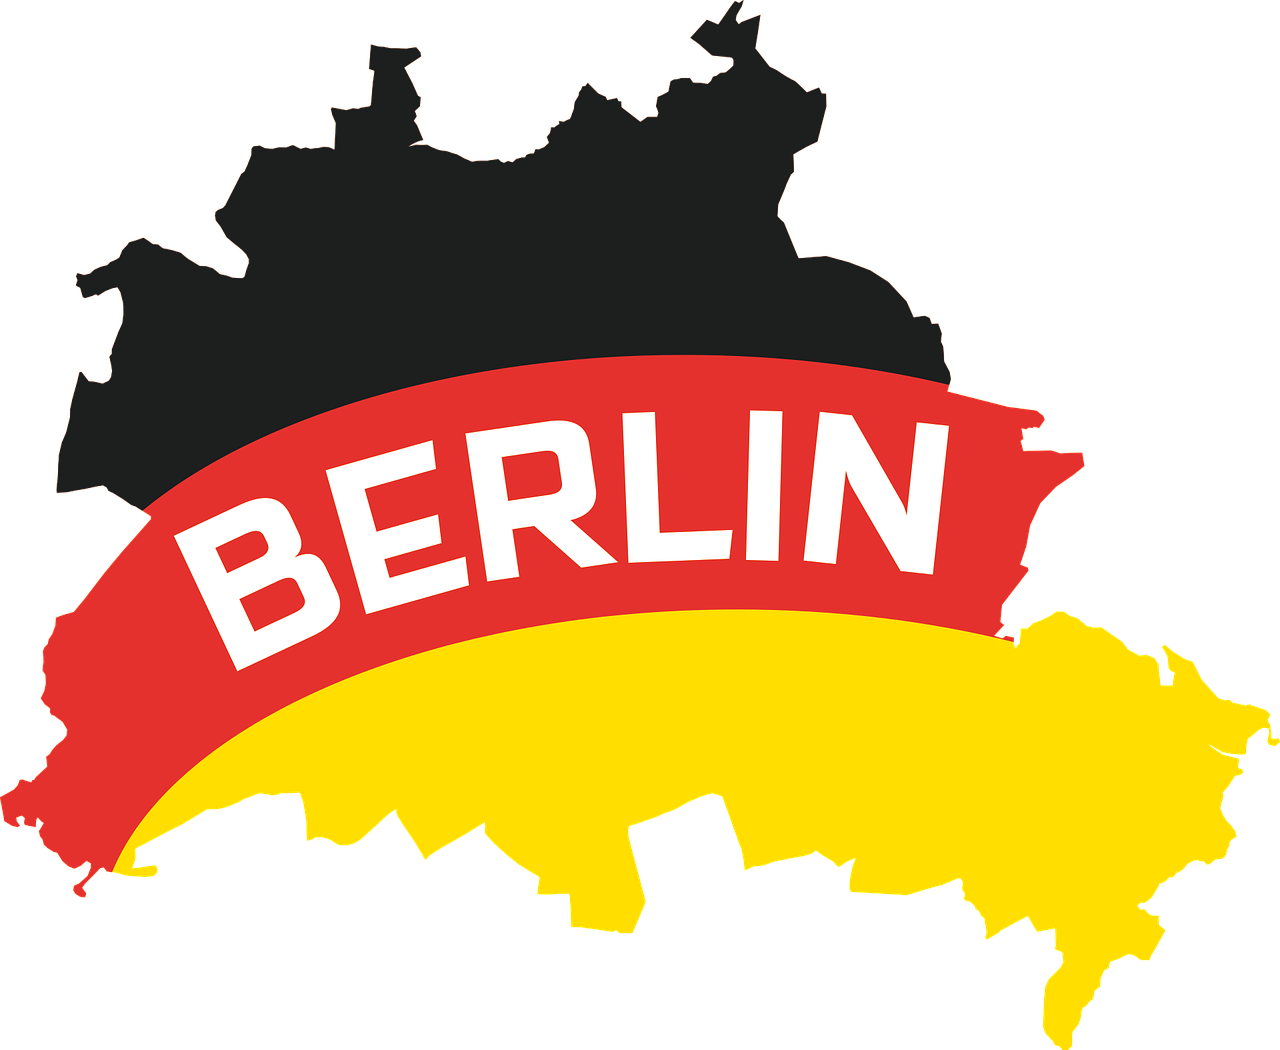 berlin outline map free photo